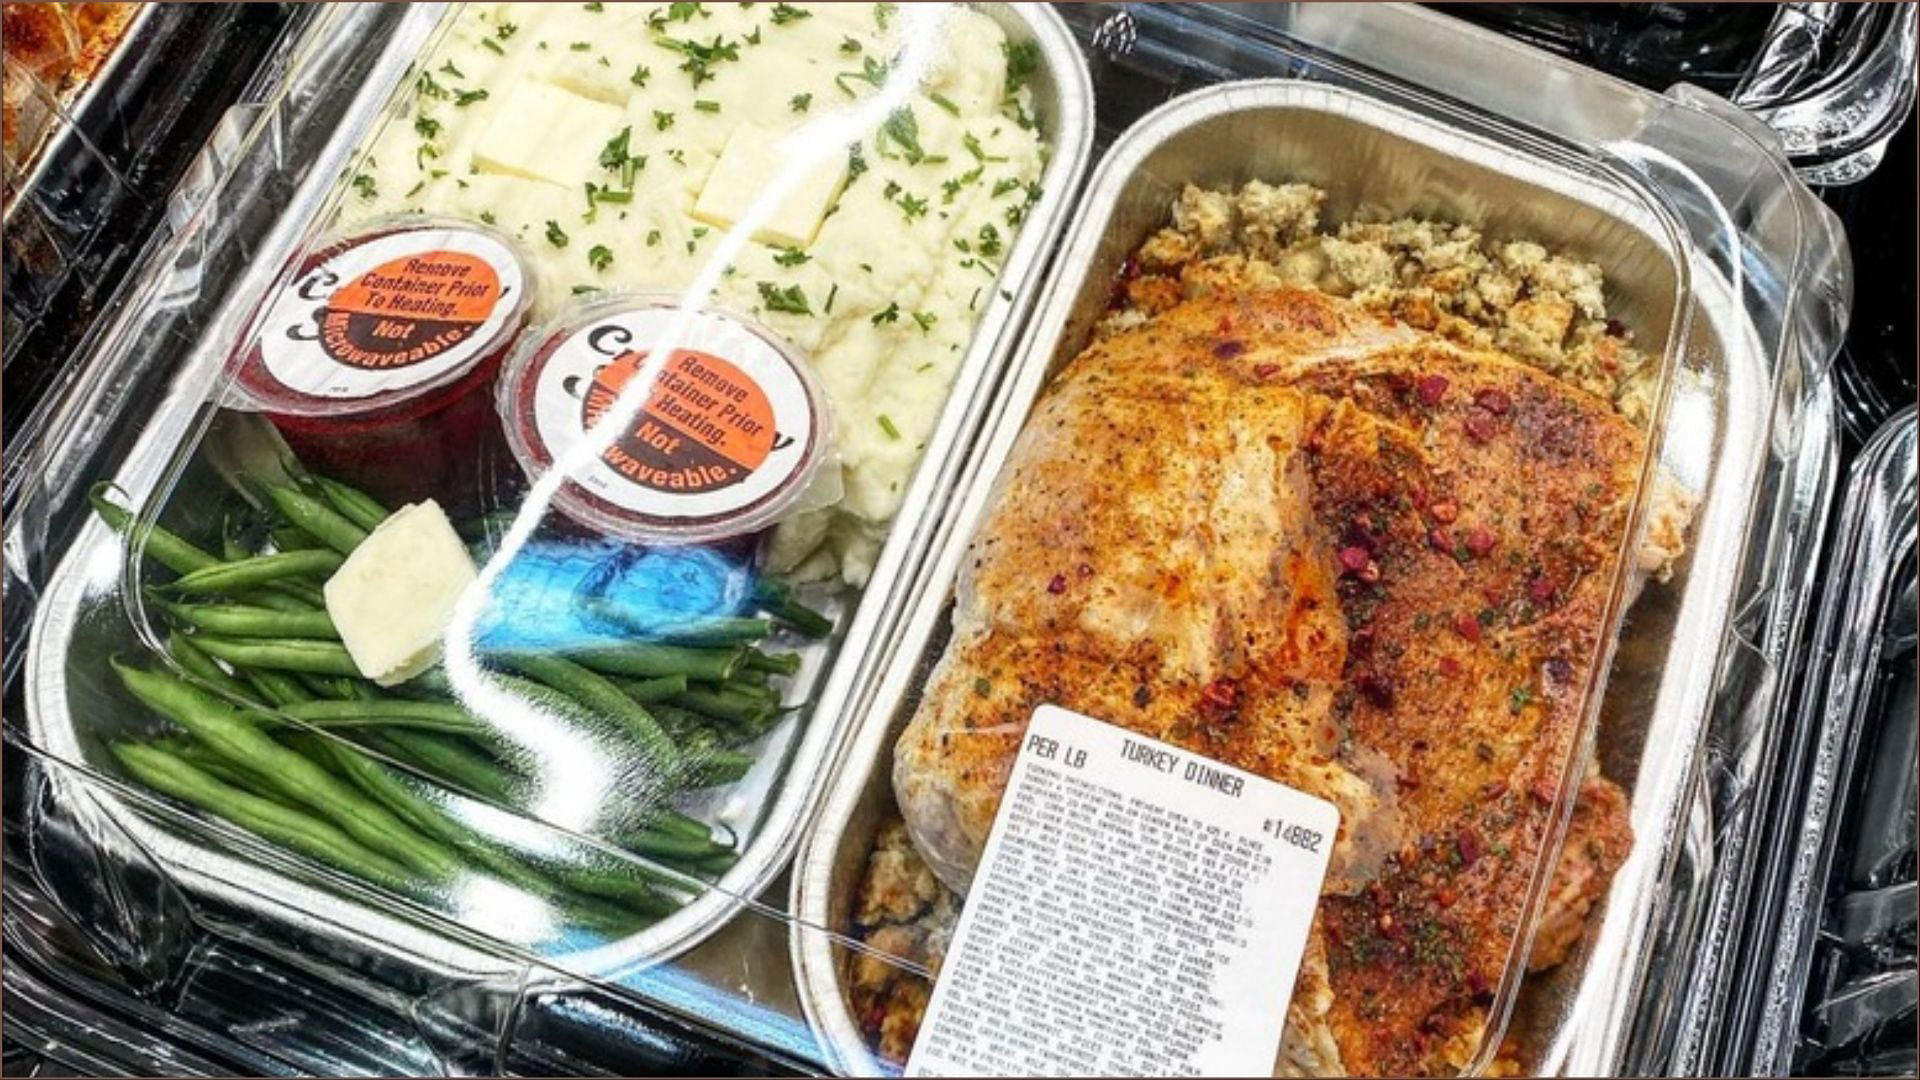 Costco Premade Thanksgiving Dinner Kit Items, price, availability, and